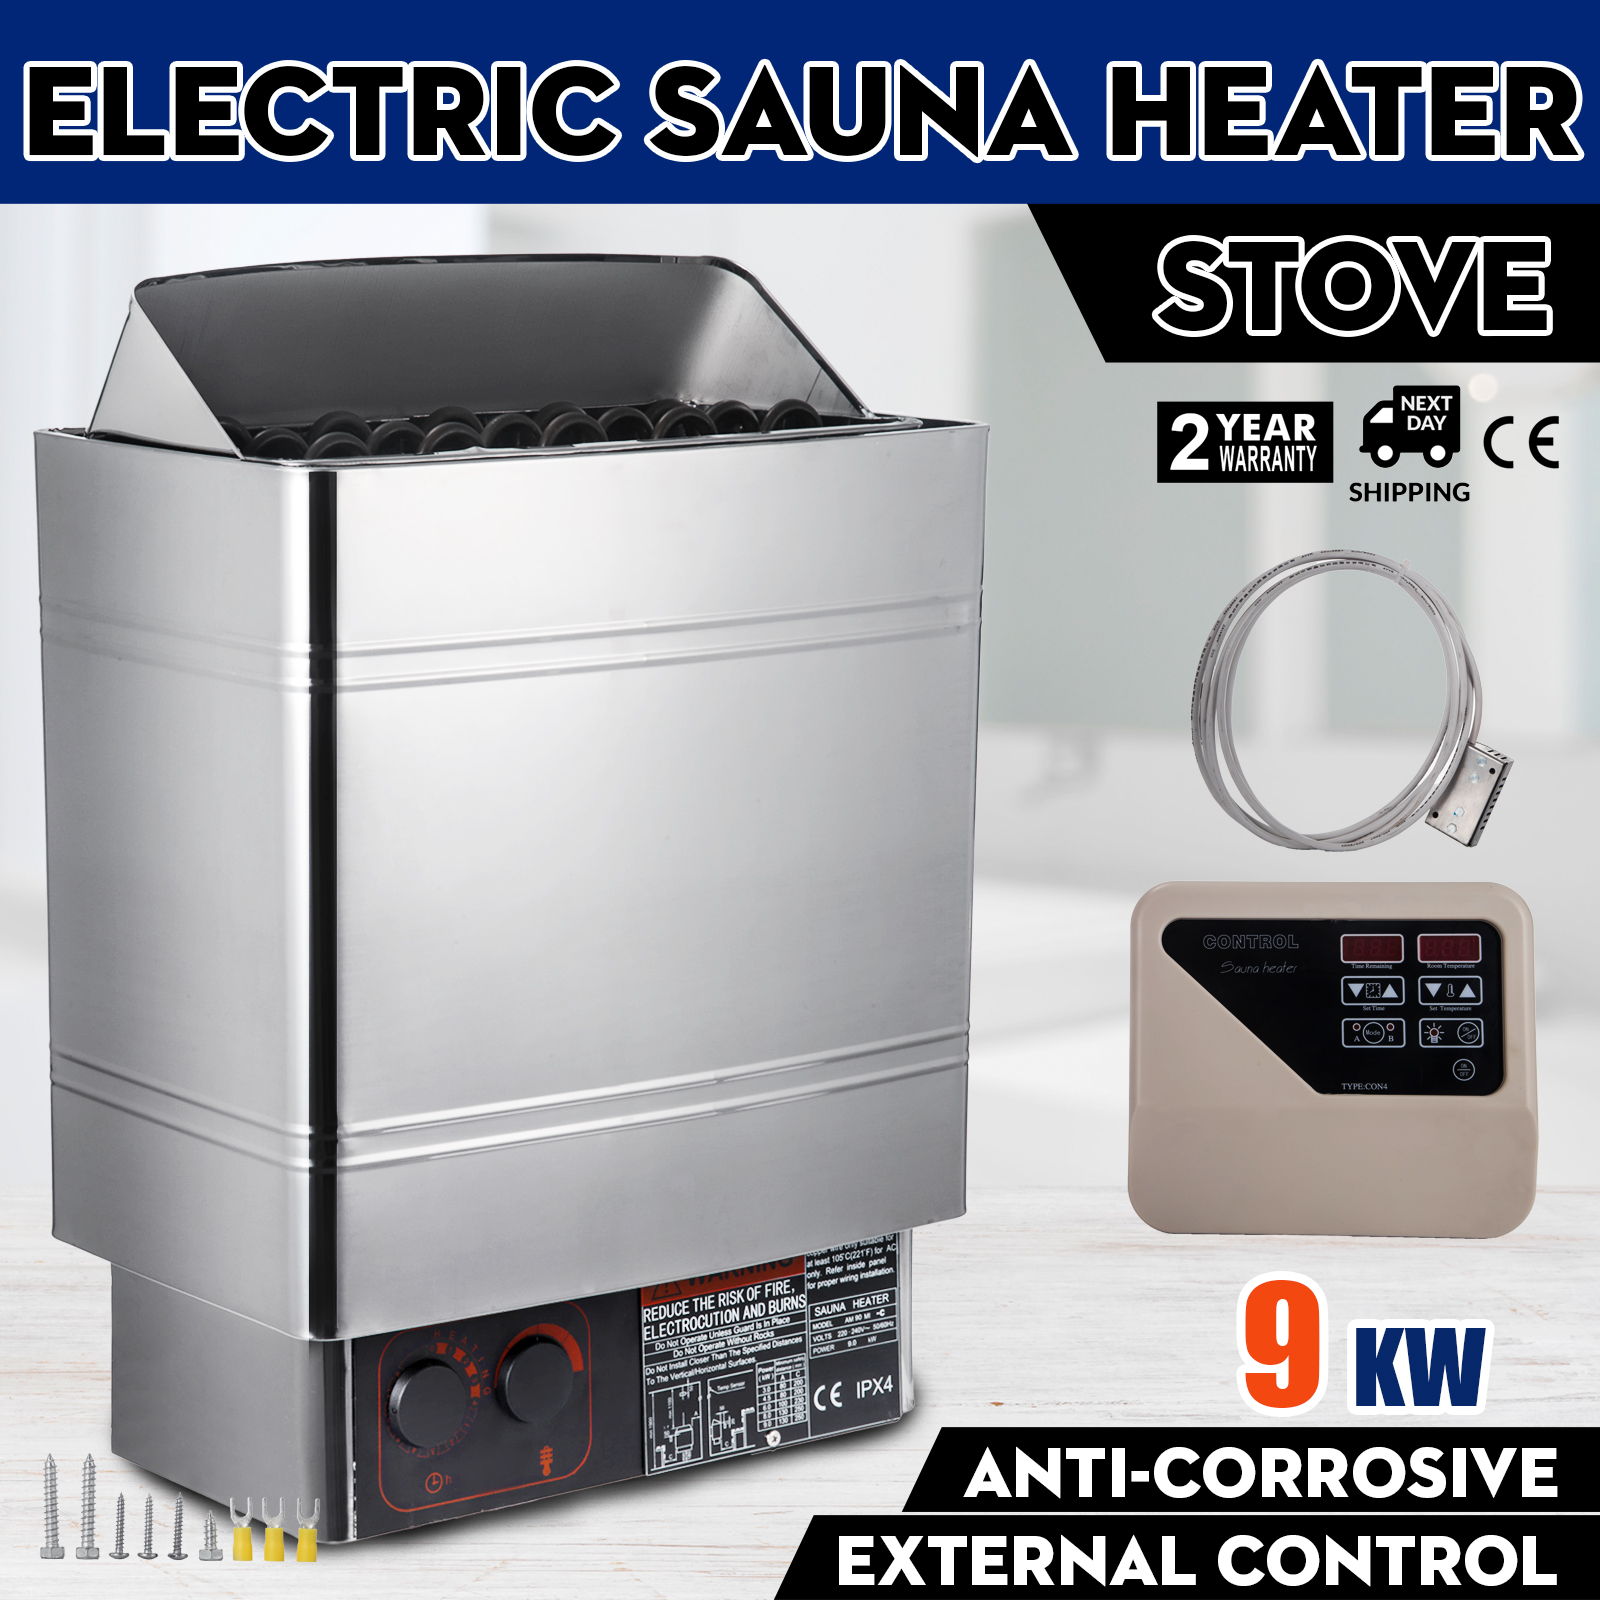 9KW Sauna Heater Stove Stainless Steel Wet&dry Digital Controller 220V ...